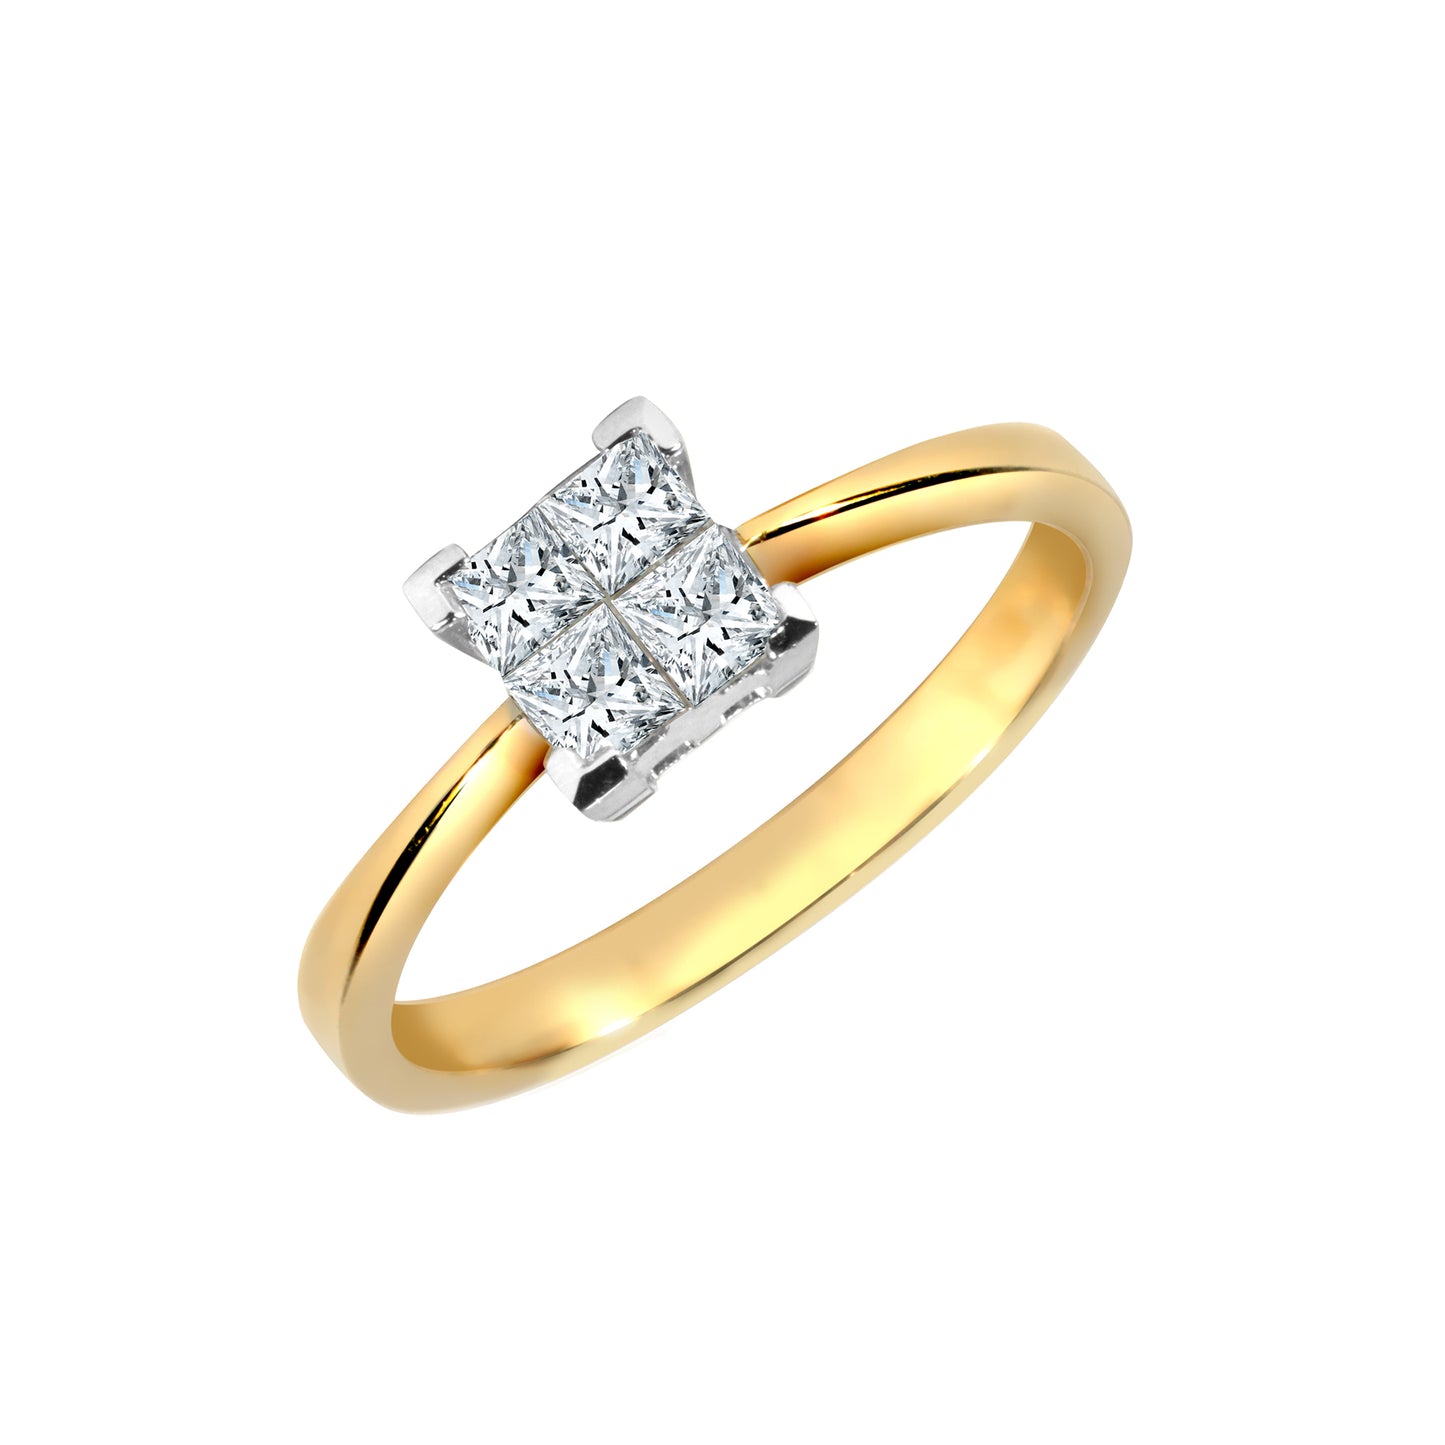 18ct Gold  Diamond 4 Stone Illusion Solitaire Engagement Ring 6mm - 18R161-050